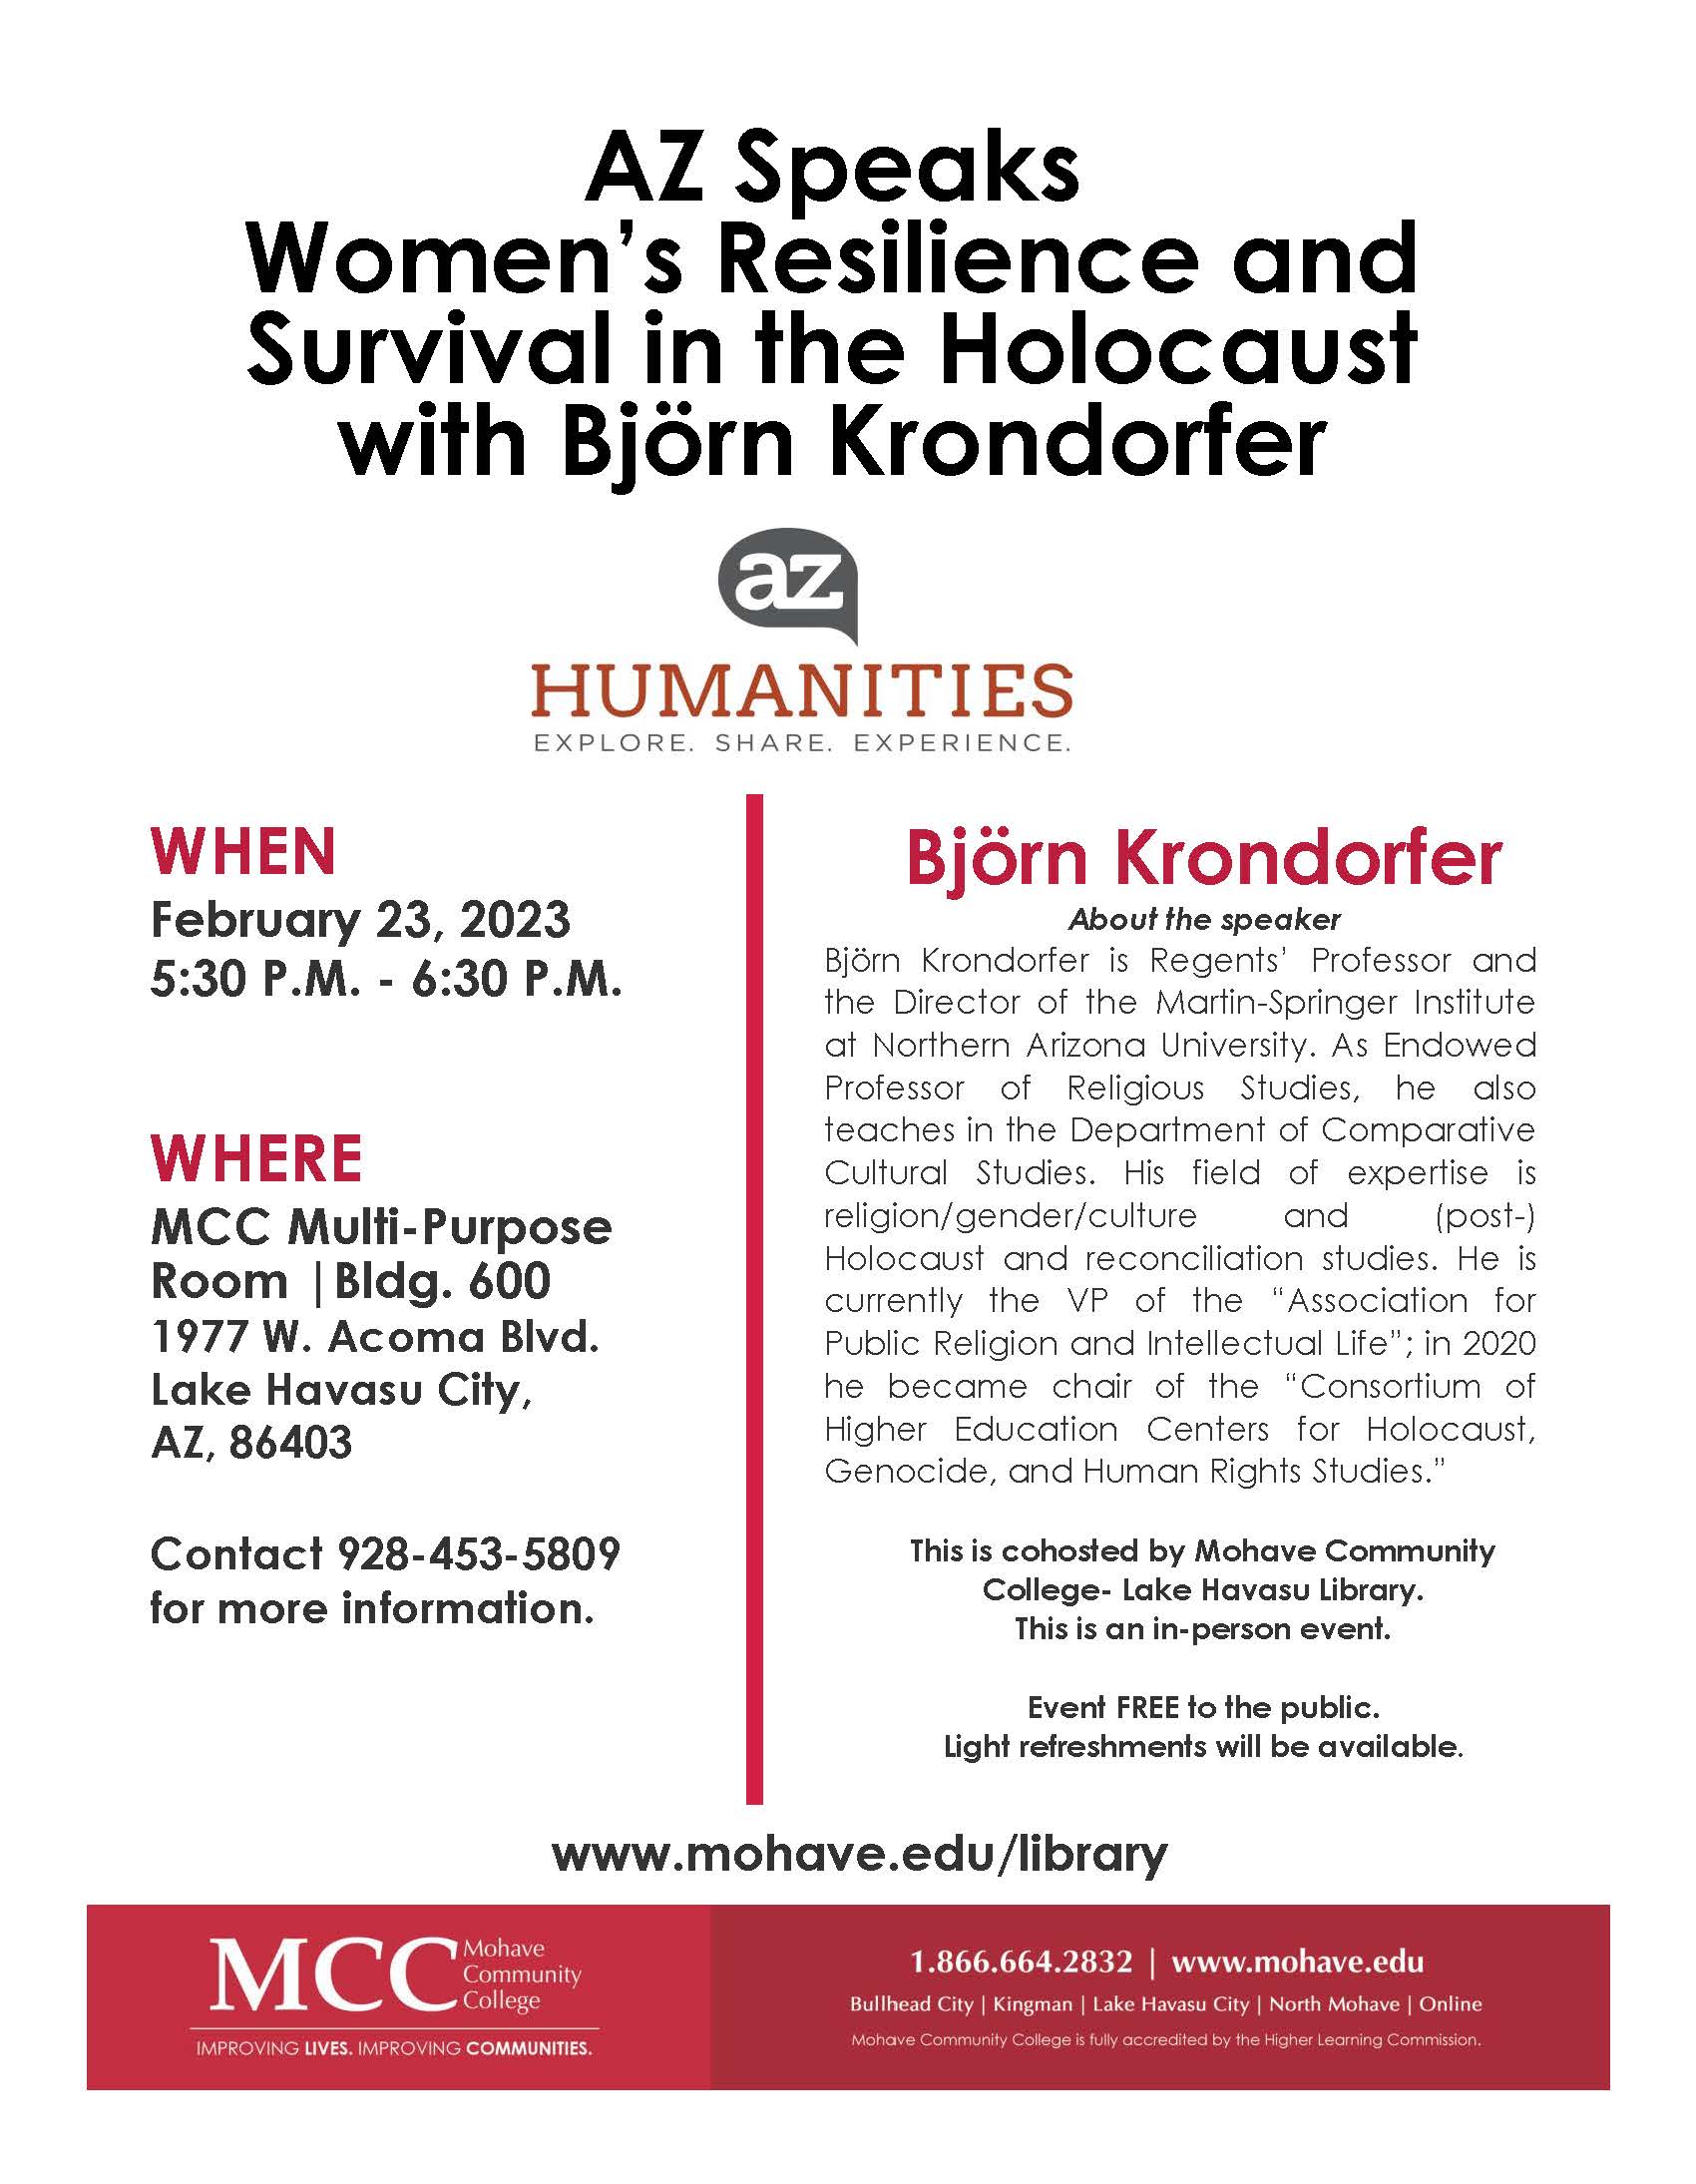 AZ Speaks – Women’s Resilience and Survival in the Holocaust with Björn Krondorfer